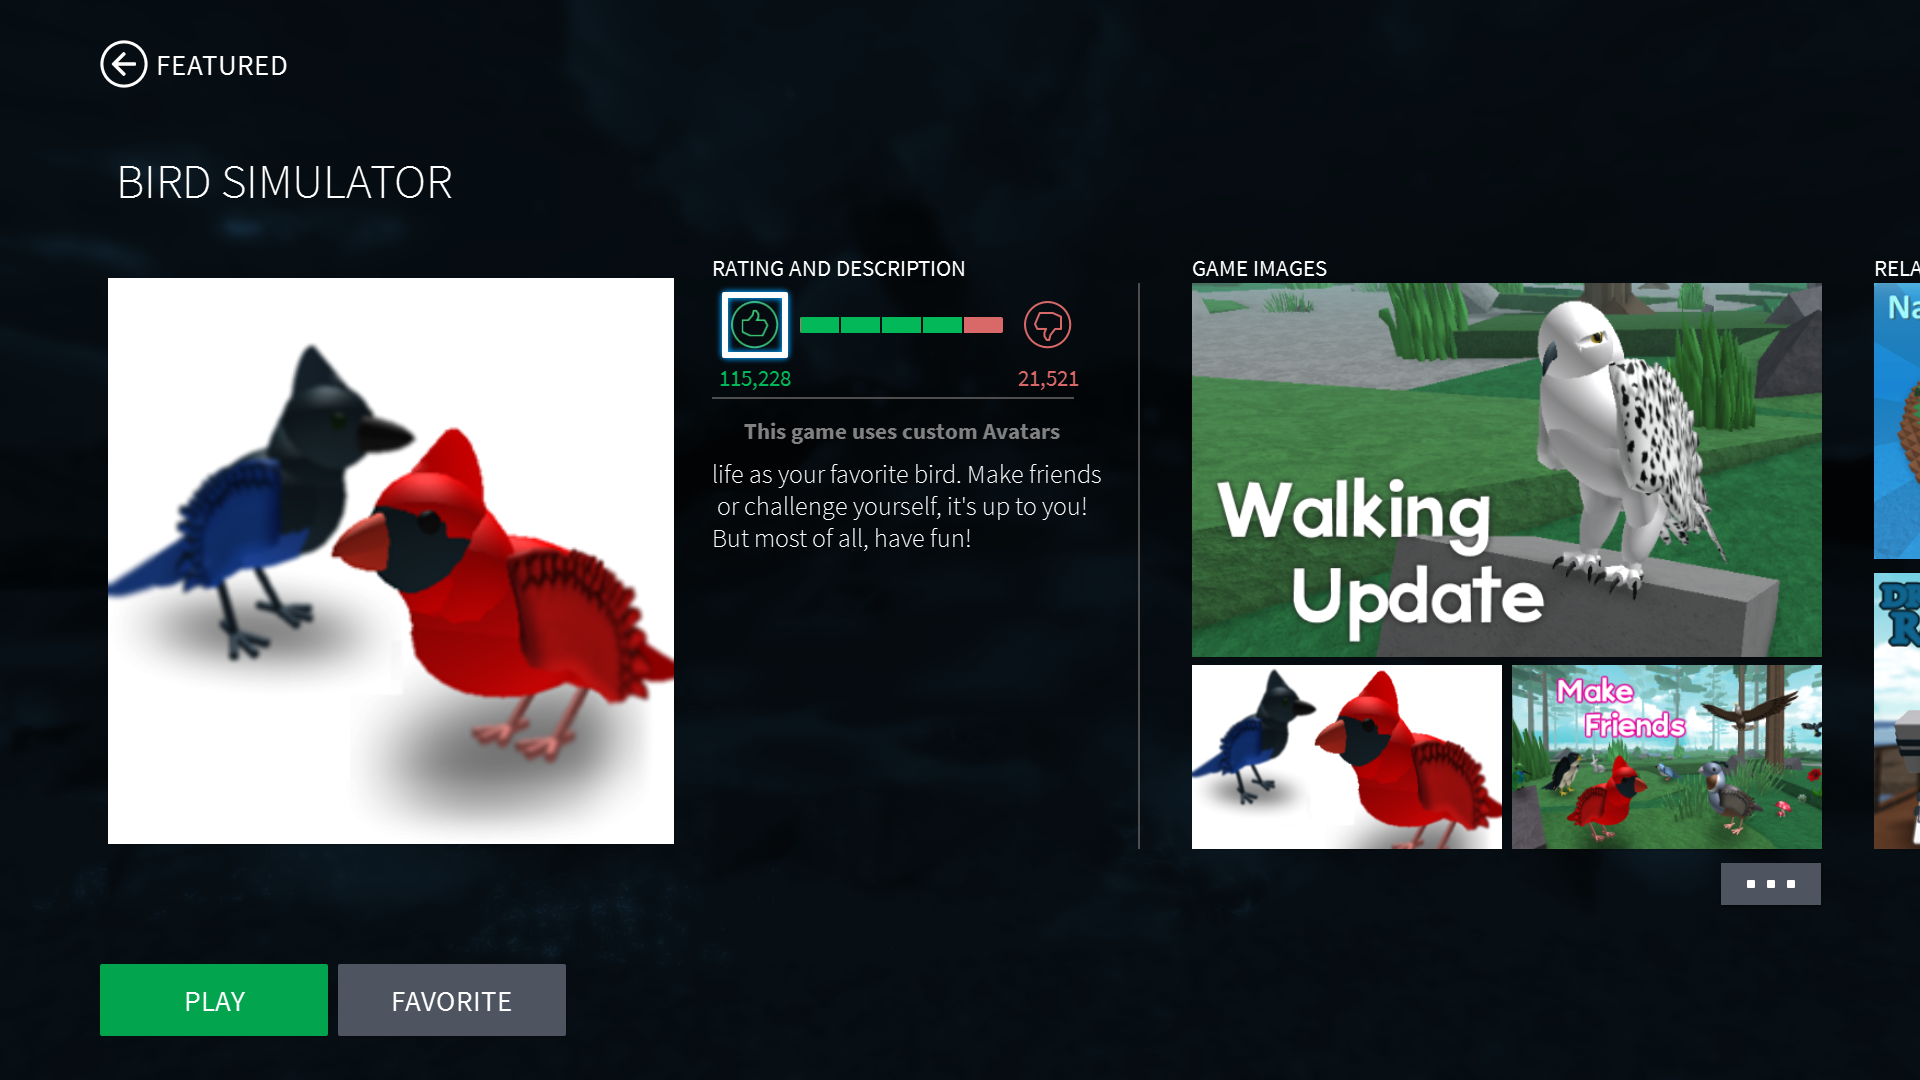 Xbox One App: How to Play a Roblox Experience – Roblox Support